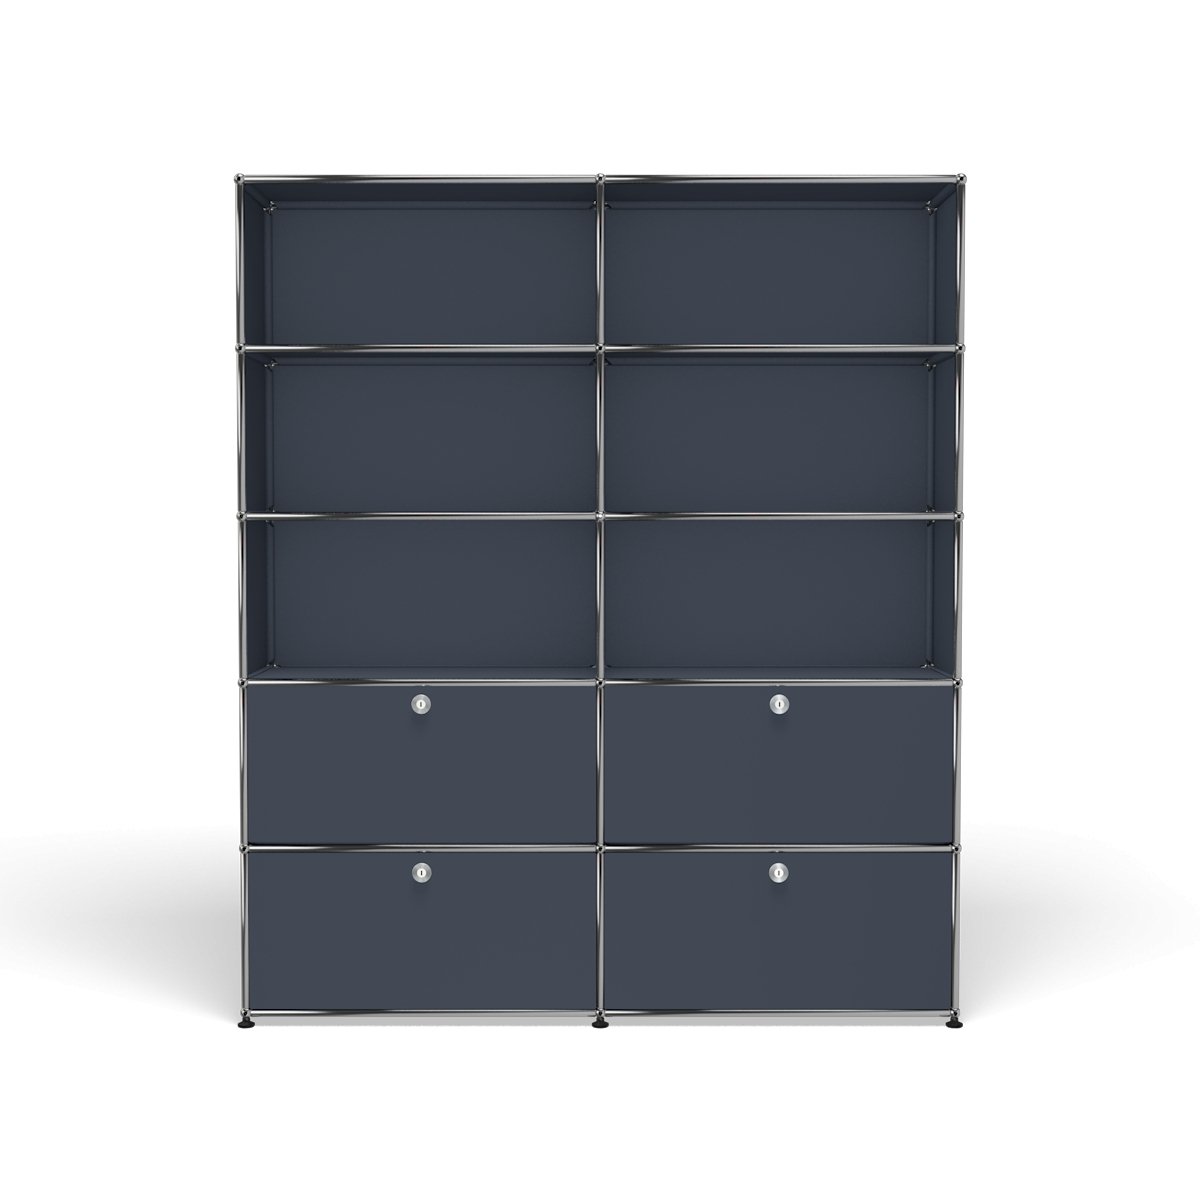 USM Haller Large Contemporary Shelving with Storage (R2) in Anthracite